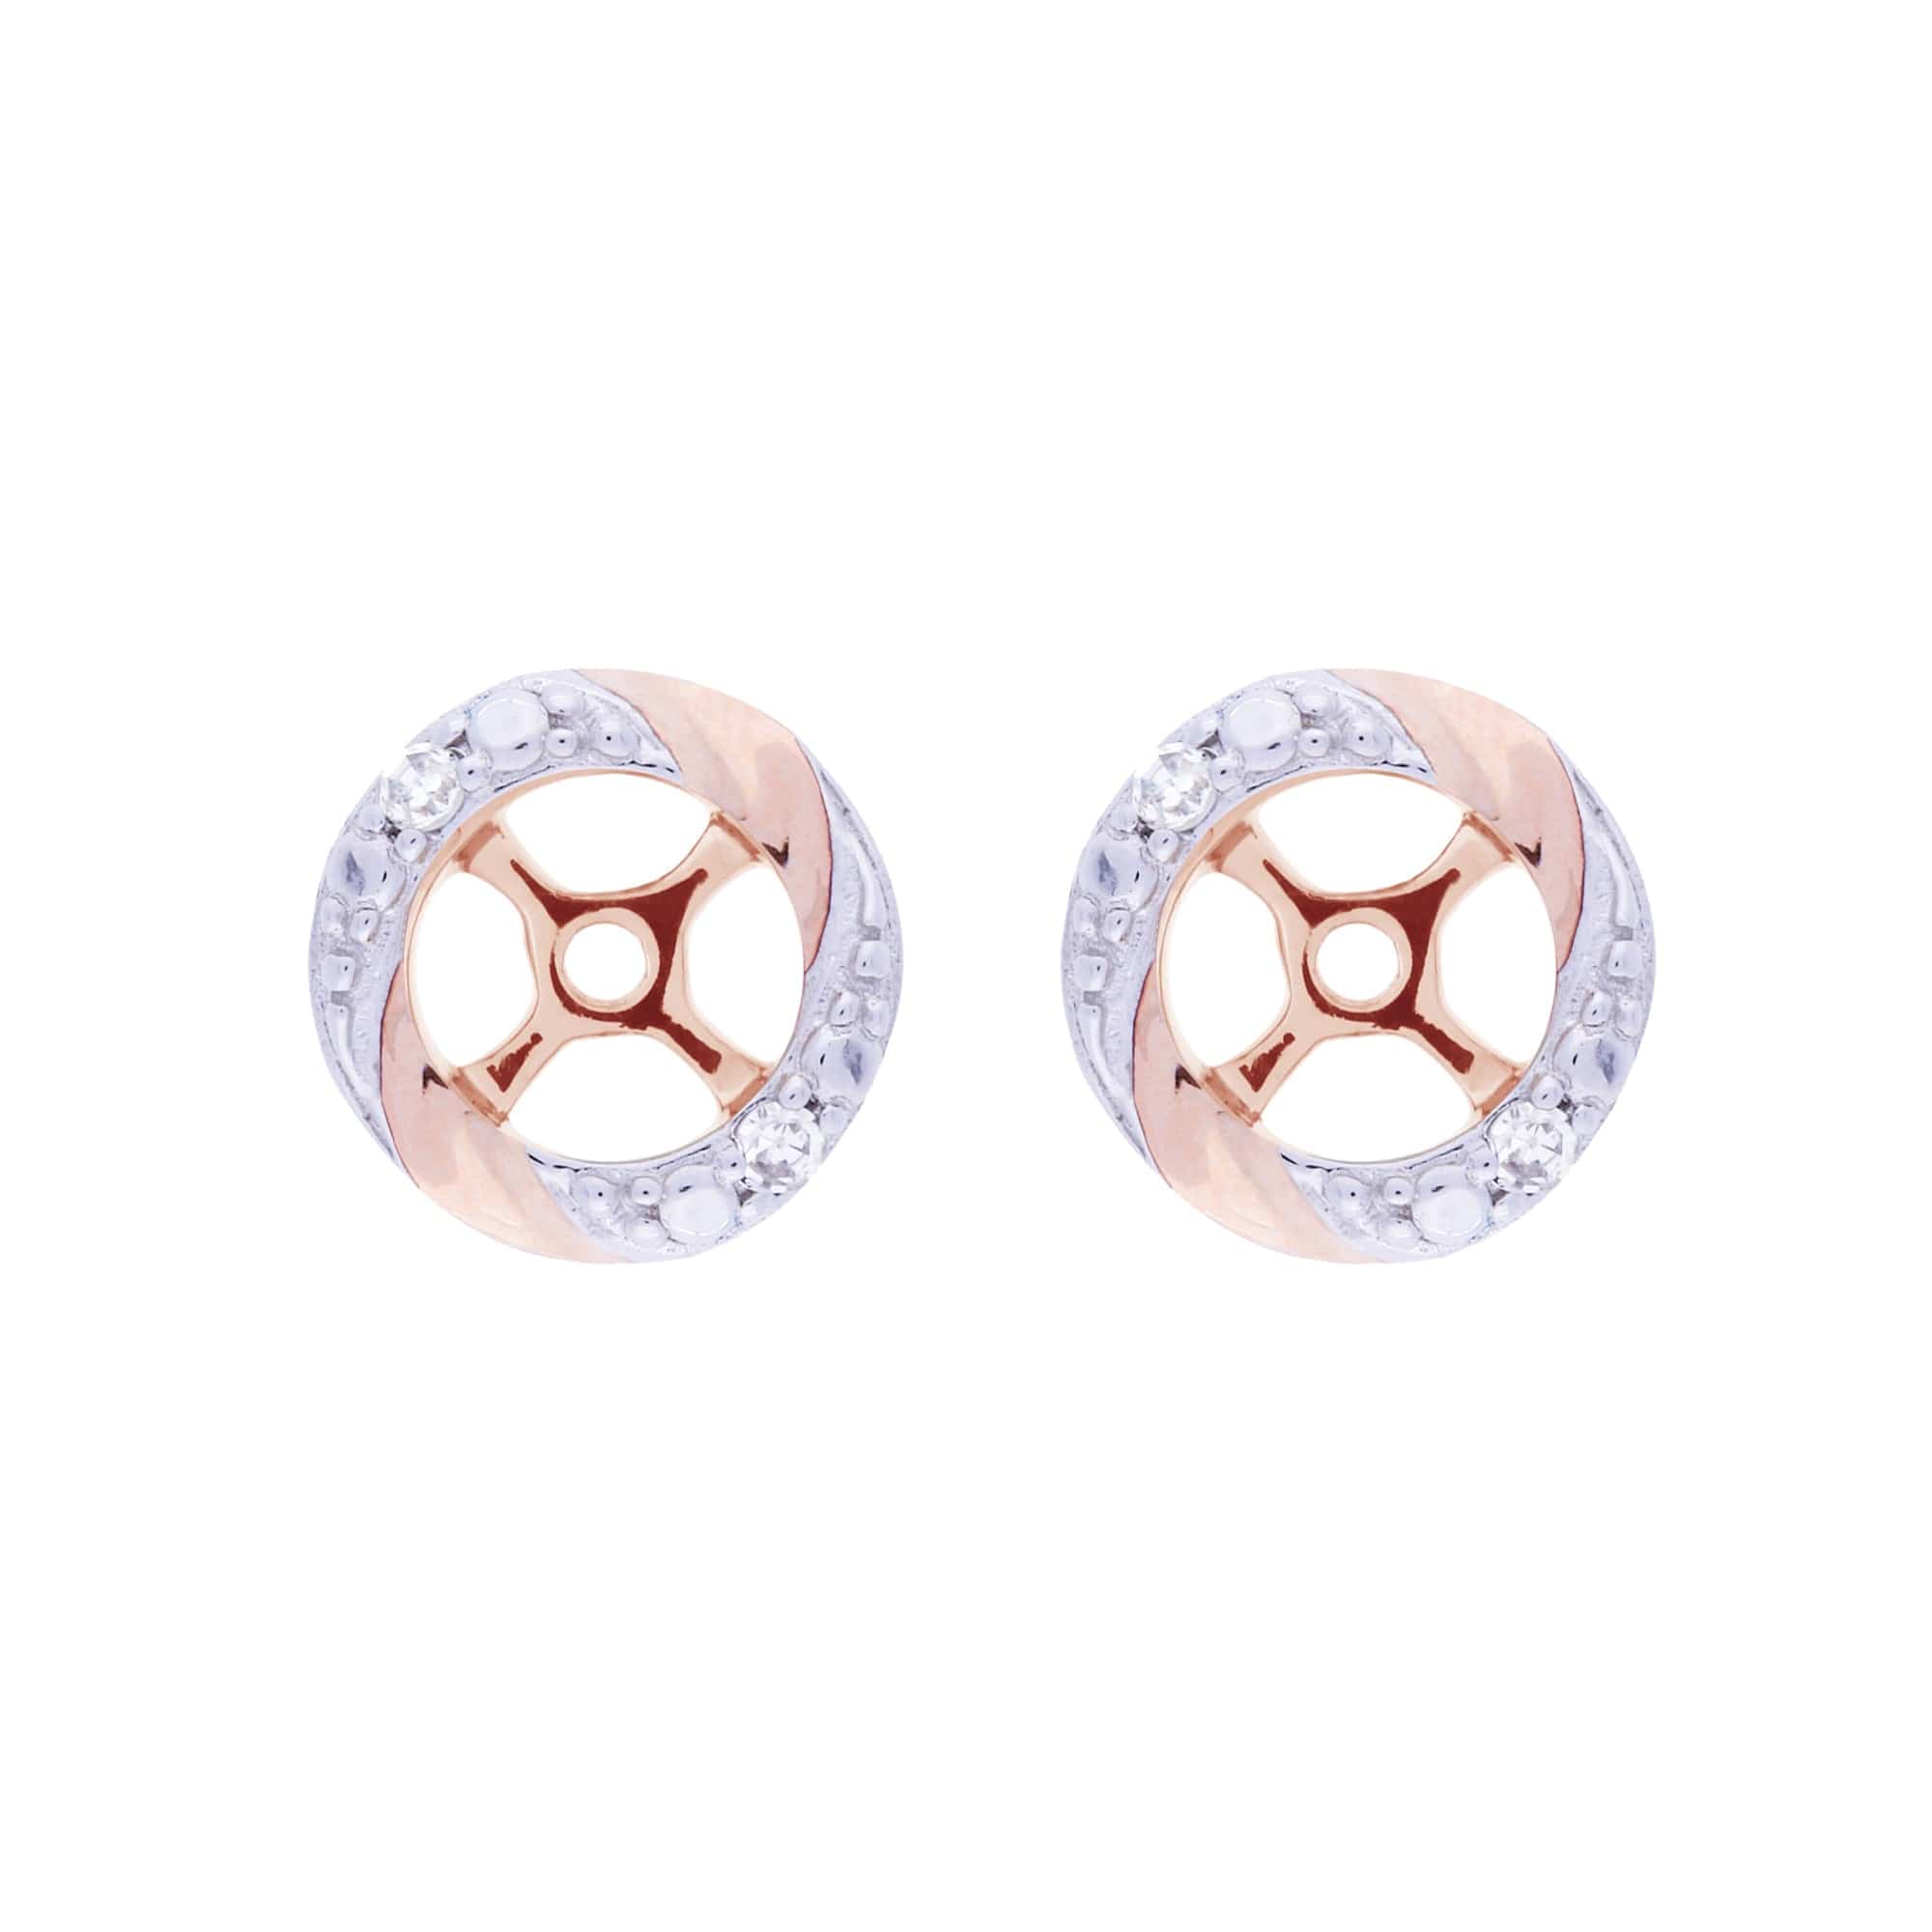 Classic Round Amethyst Stud Earrings with Detachable Diamond Round Earrings Jacket Set in 9ct White Gold - Gemondo